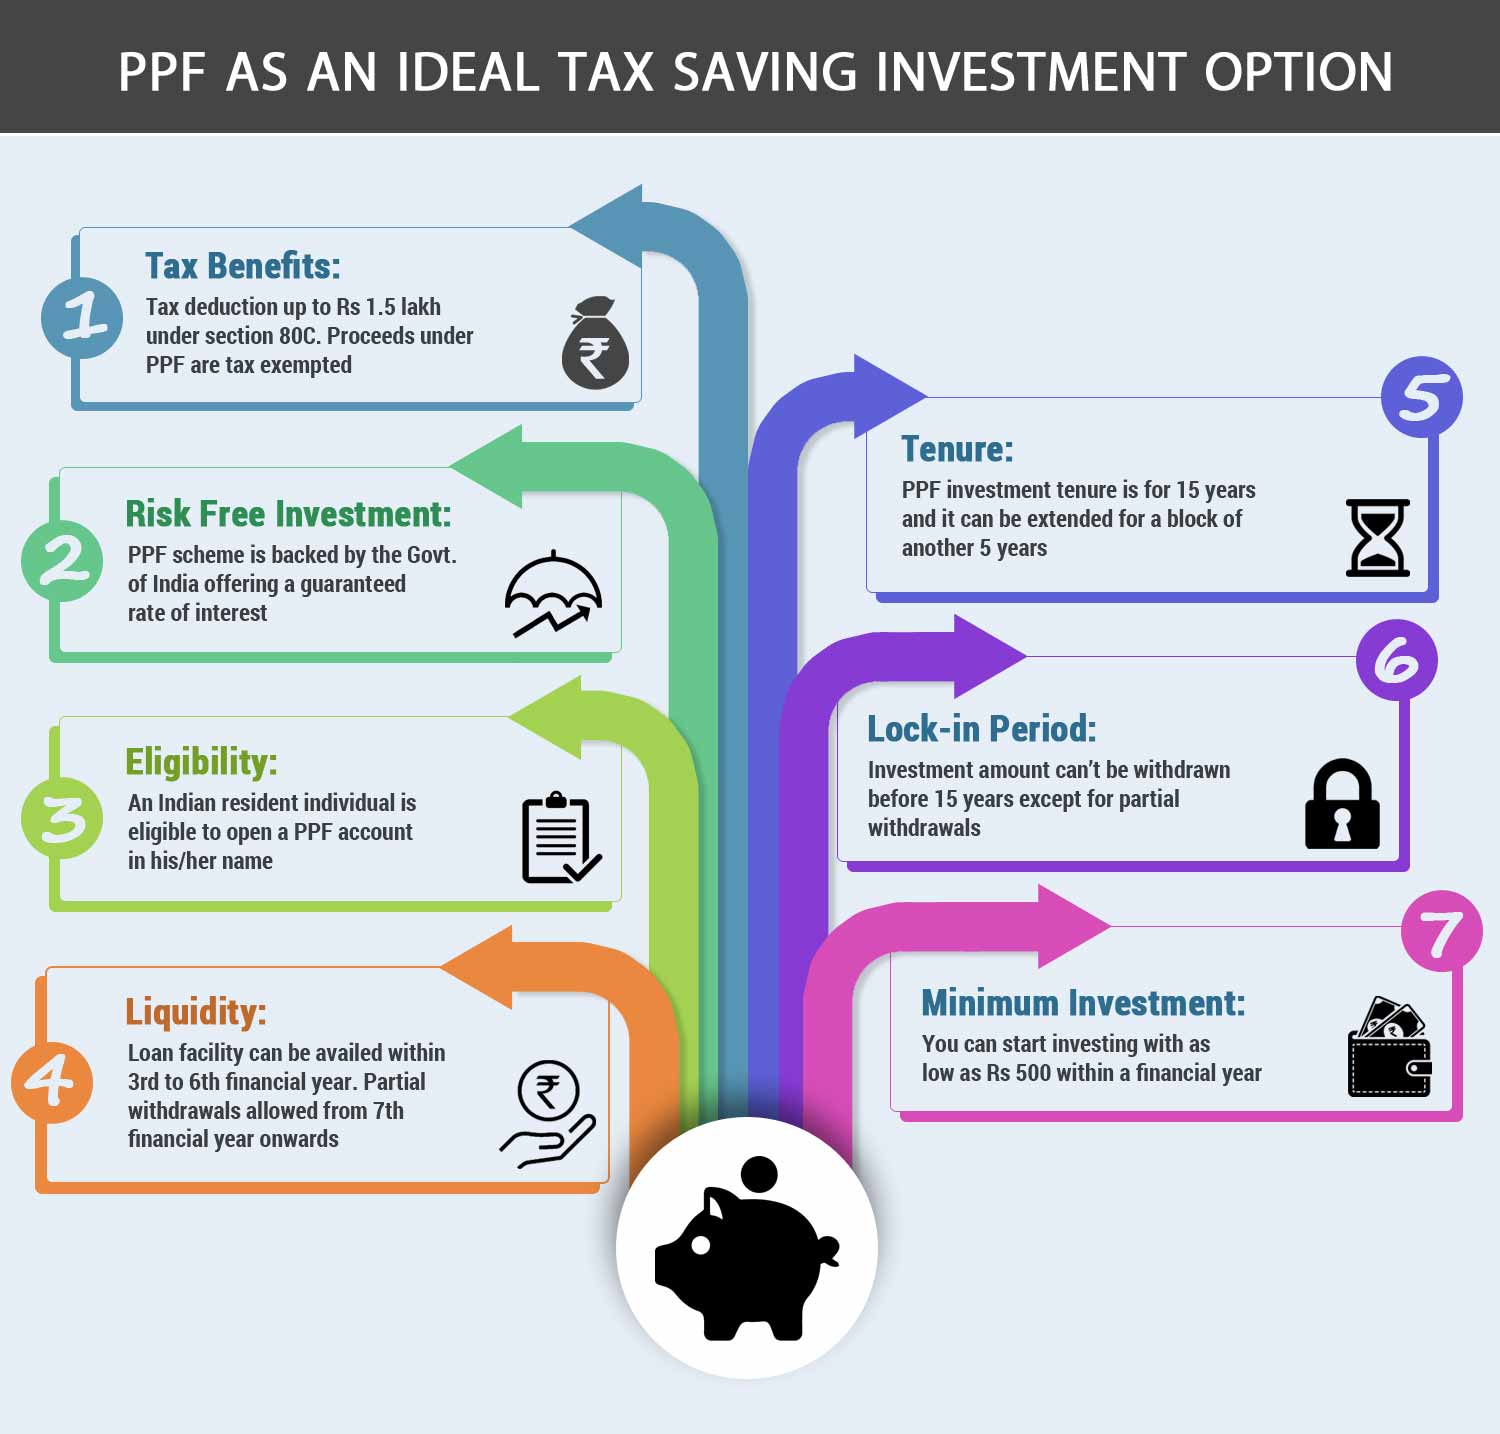 ppf-as-a-tax-saving-instrument-comparepolicy